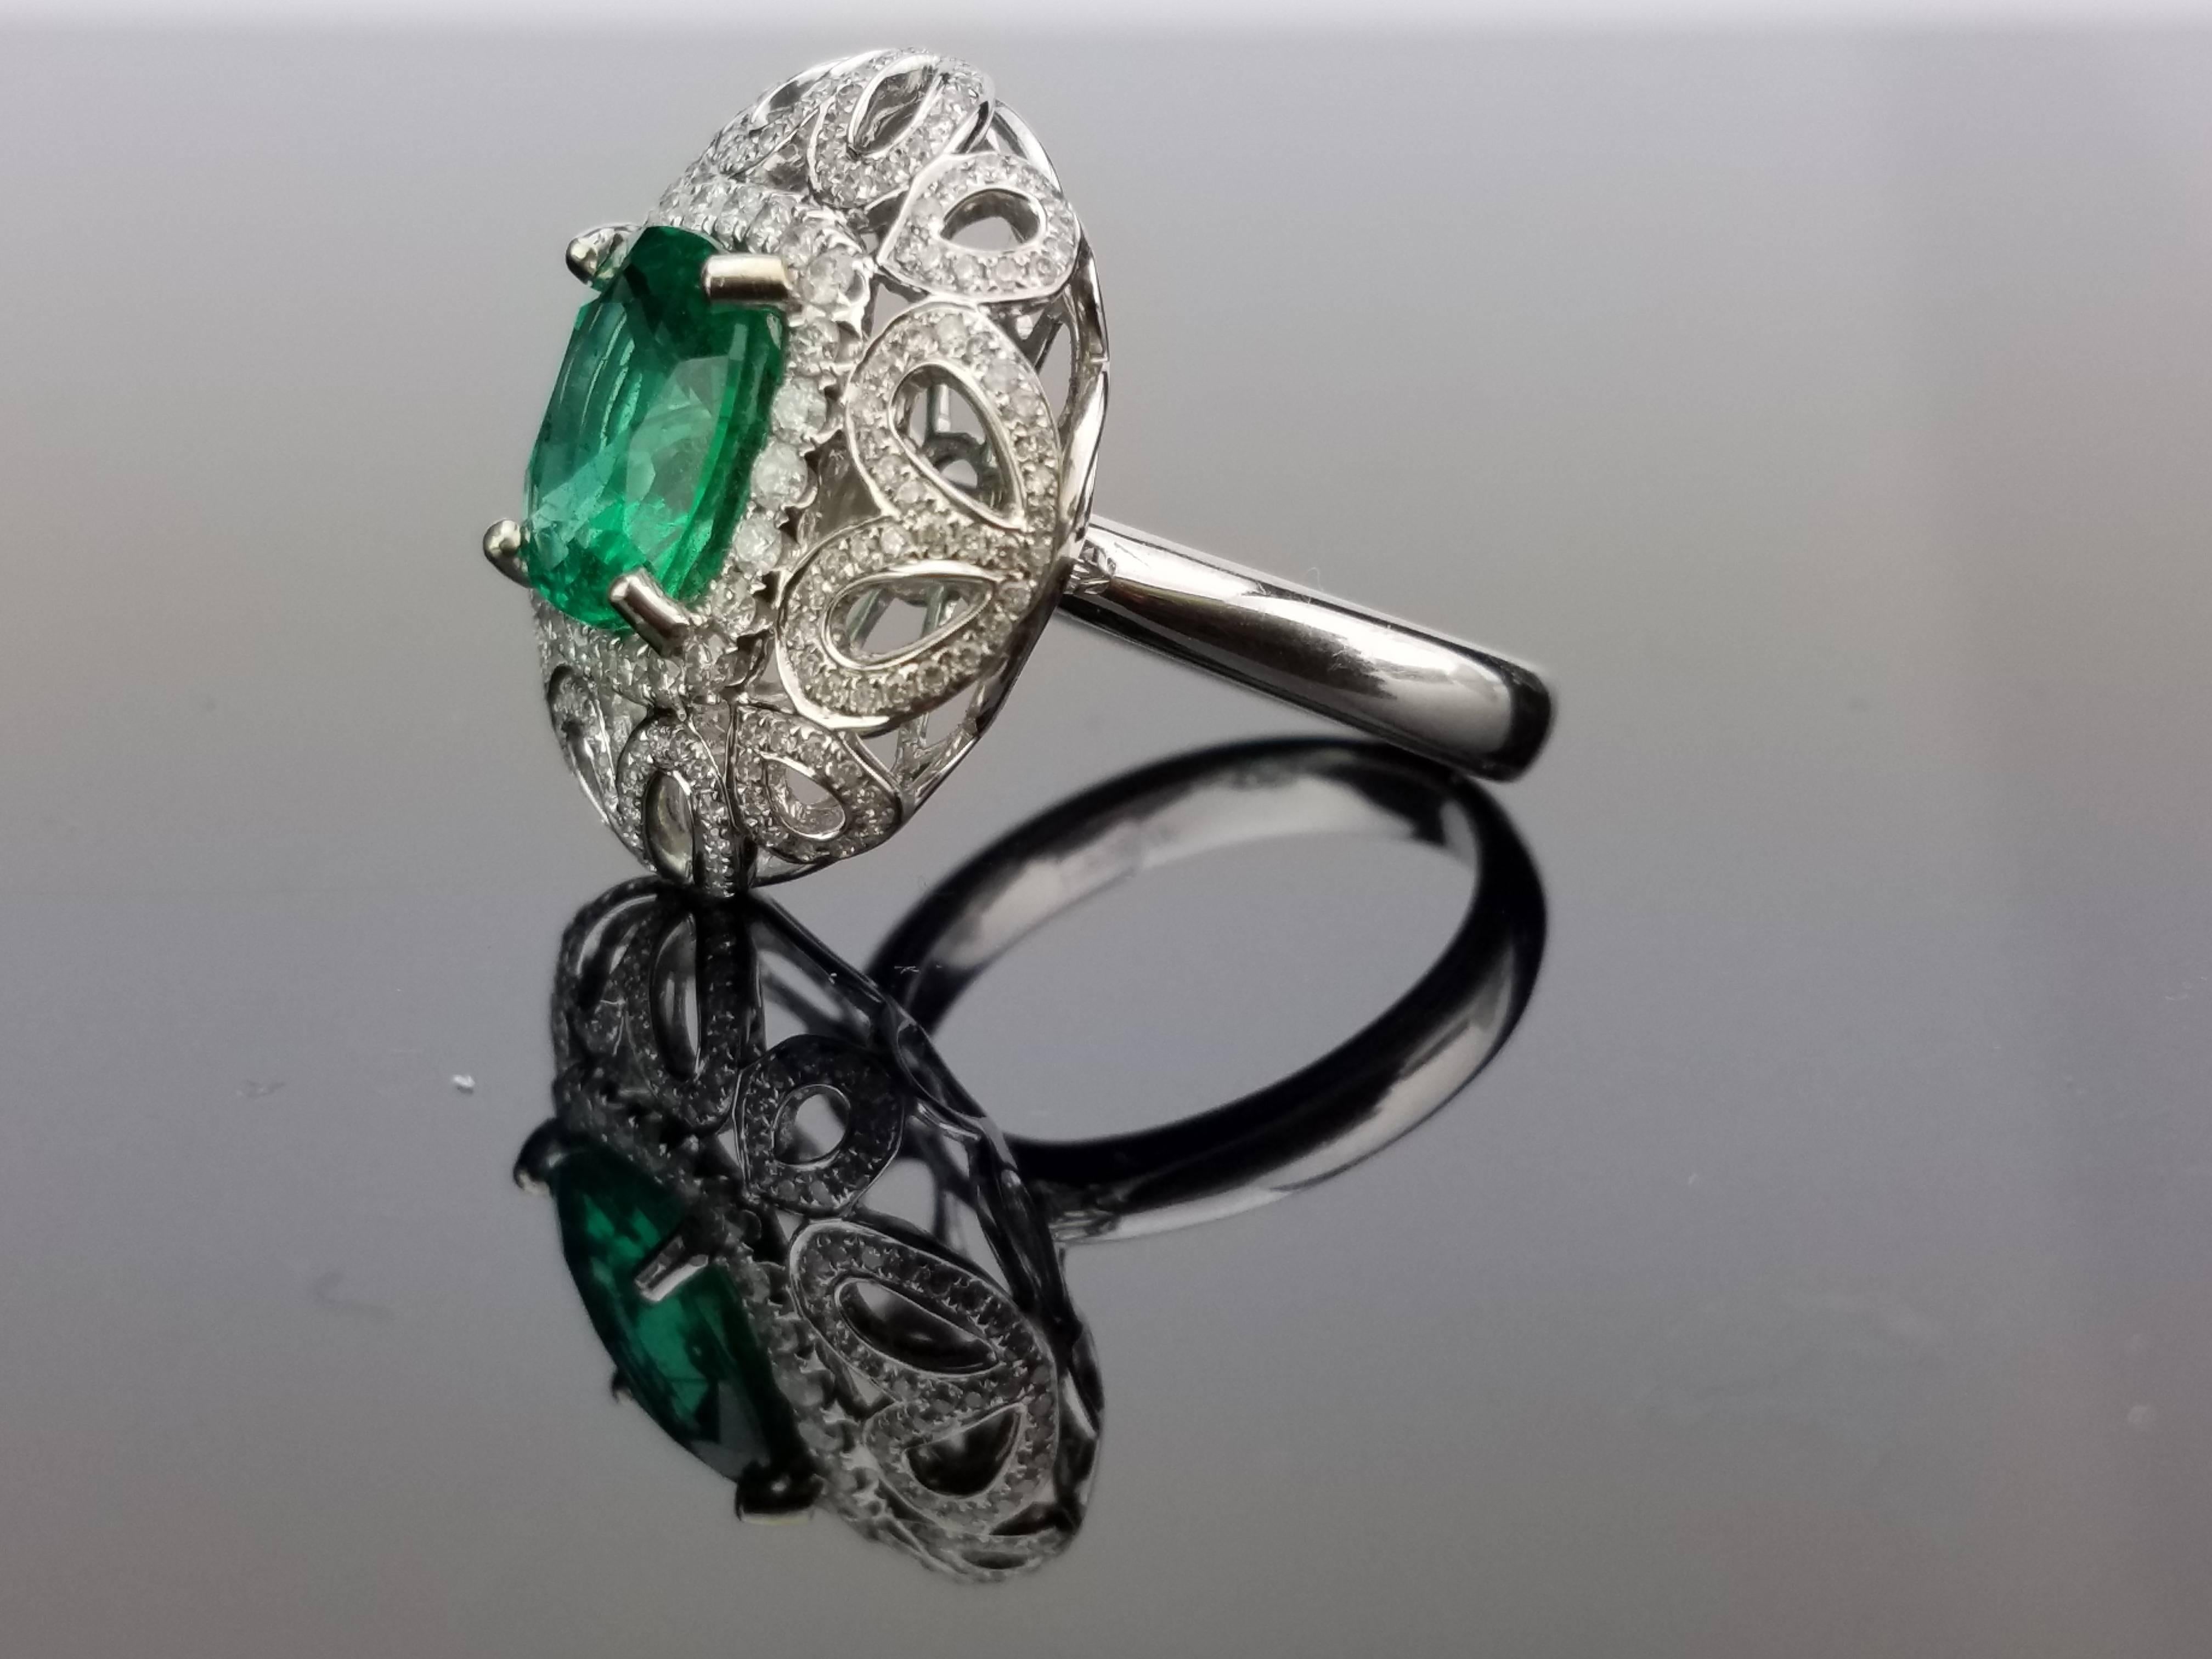 Statement Zambian Emerald Cocktail Ring with Brilliant cut Diamond on 18K White Gold Band.

Center Stone Details: 
Stone: Zambian Emerald
Cut: Cushion
Weight: 3.27 carat

Diamond Details: 
Cut: Brilliant (round)
Total Carat Weight: 1.36